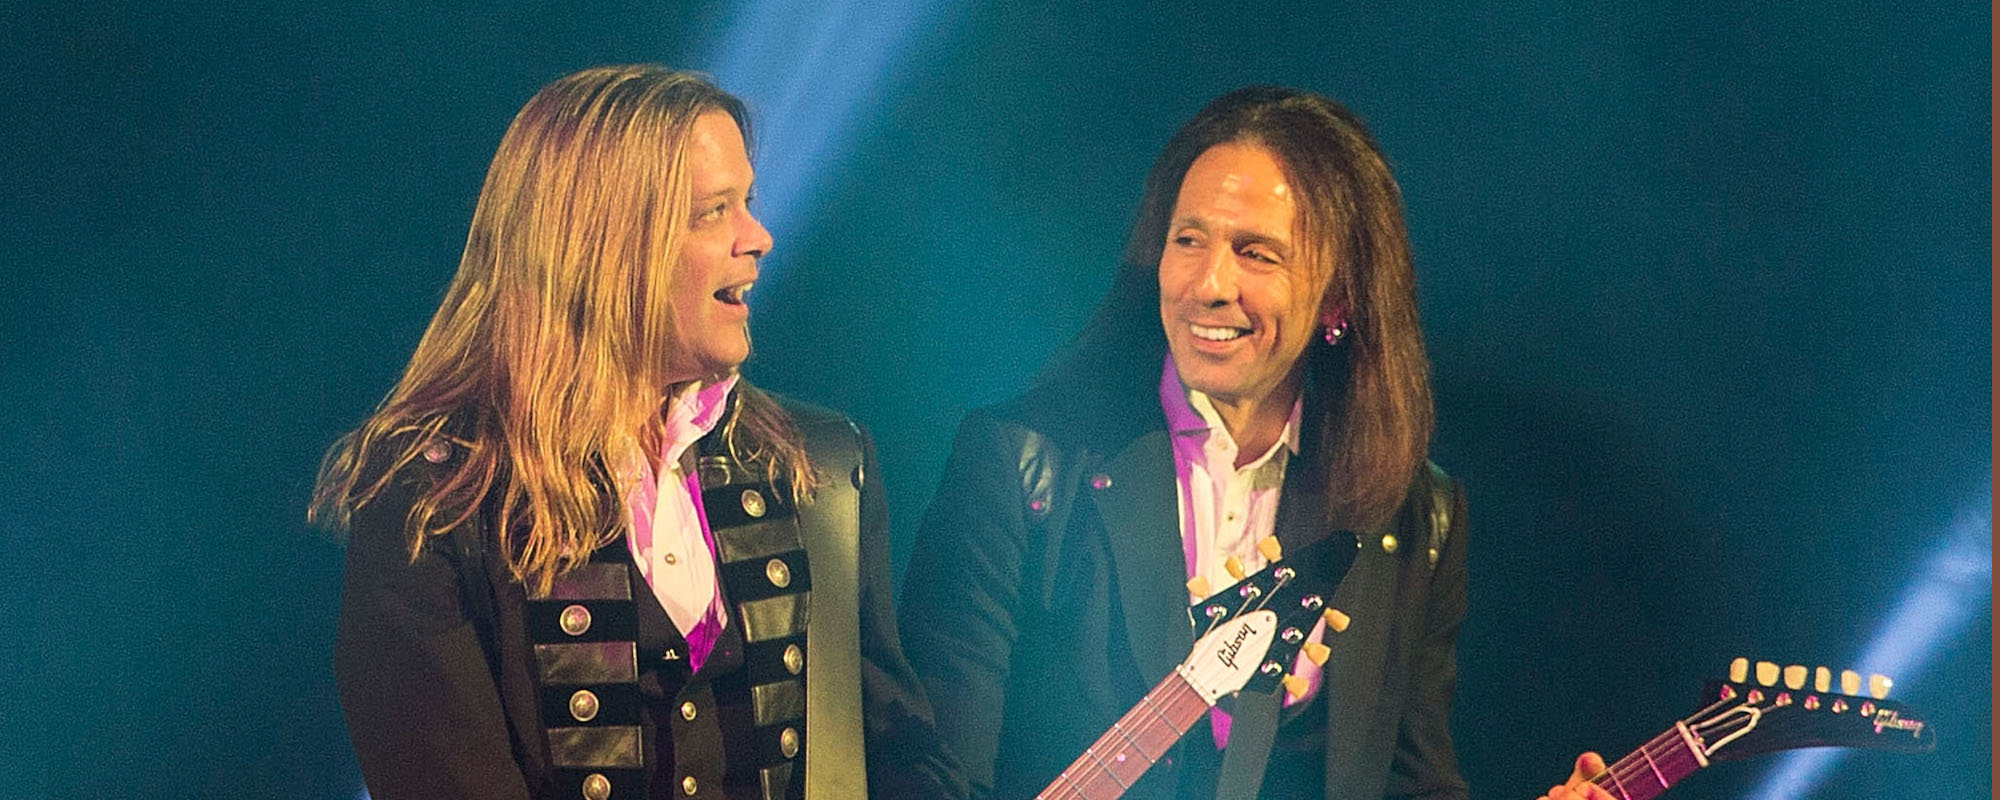 The Meaning Behind the Band Name Trans-Siberian Orchestra